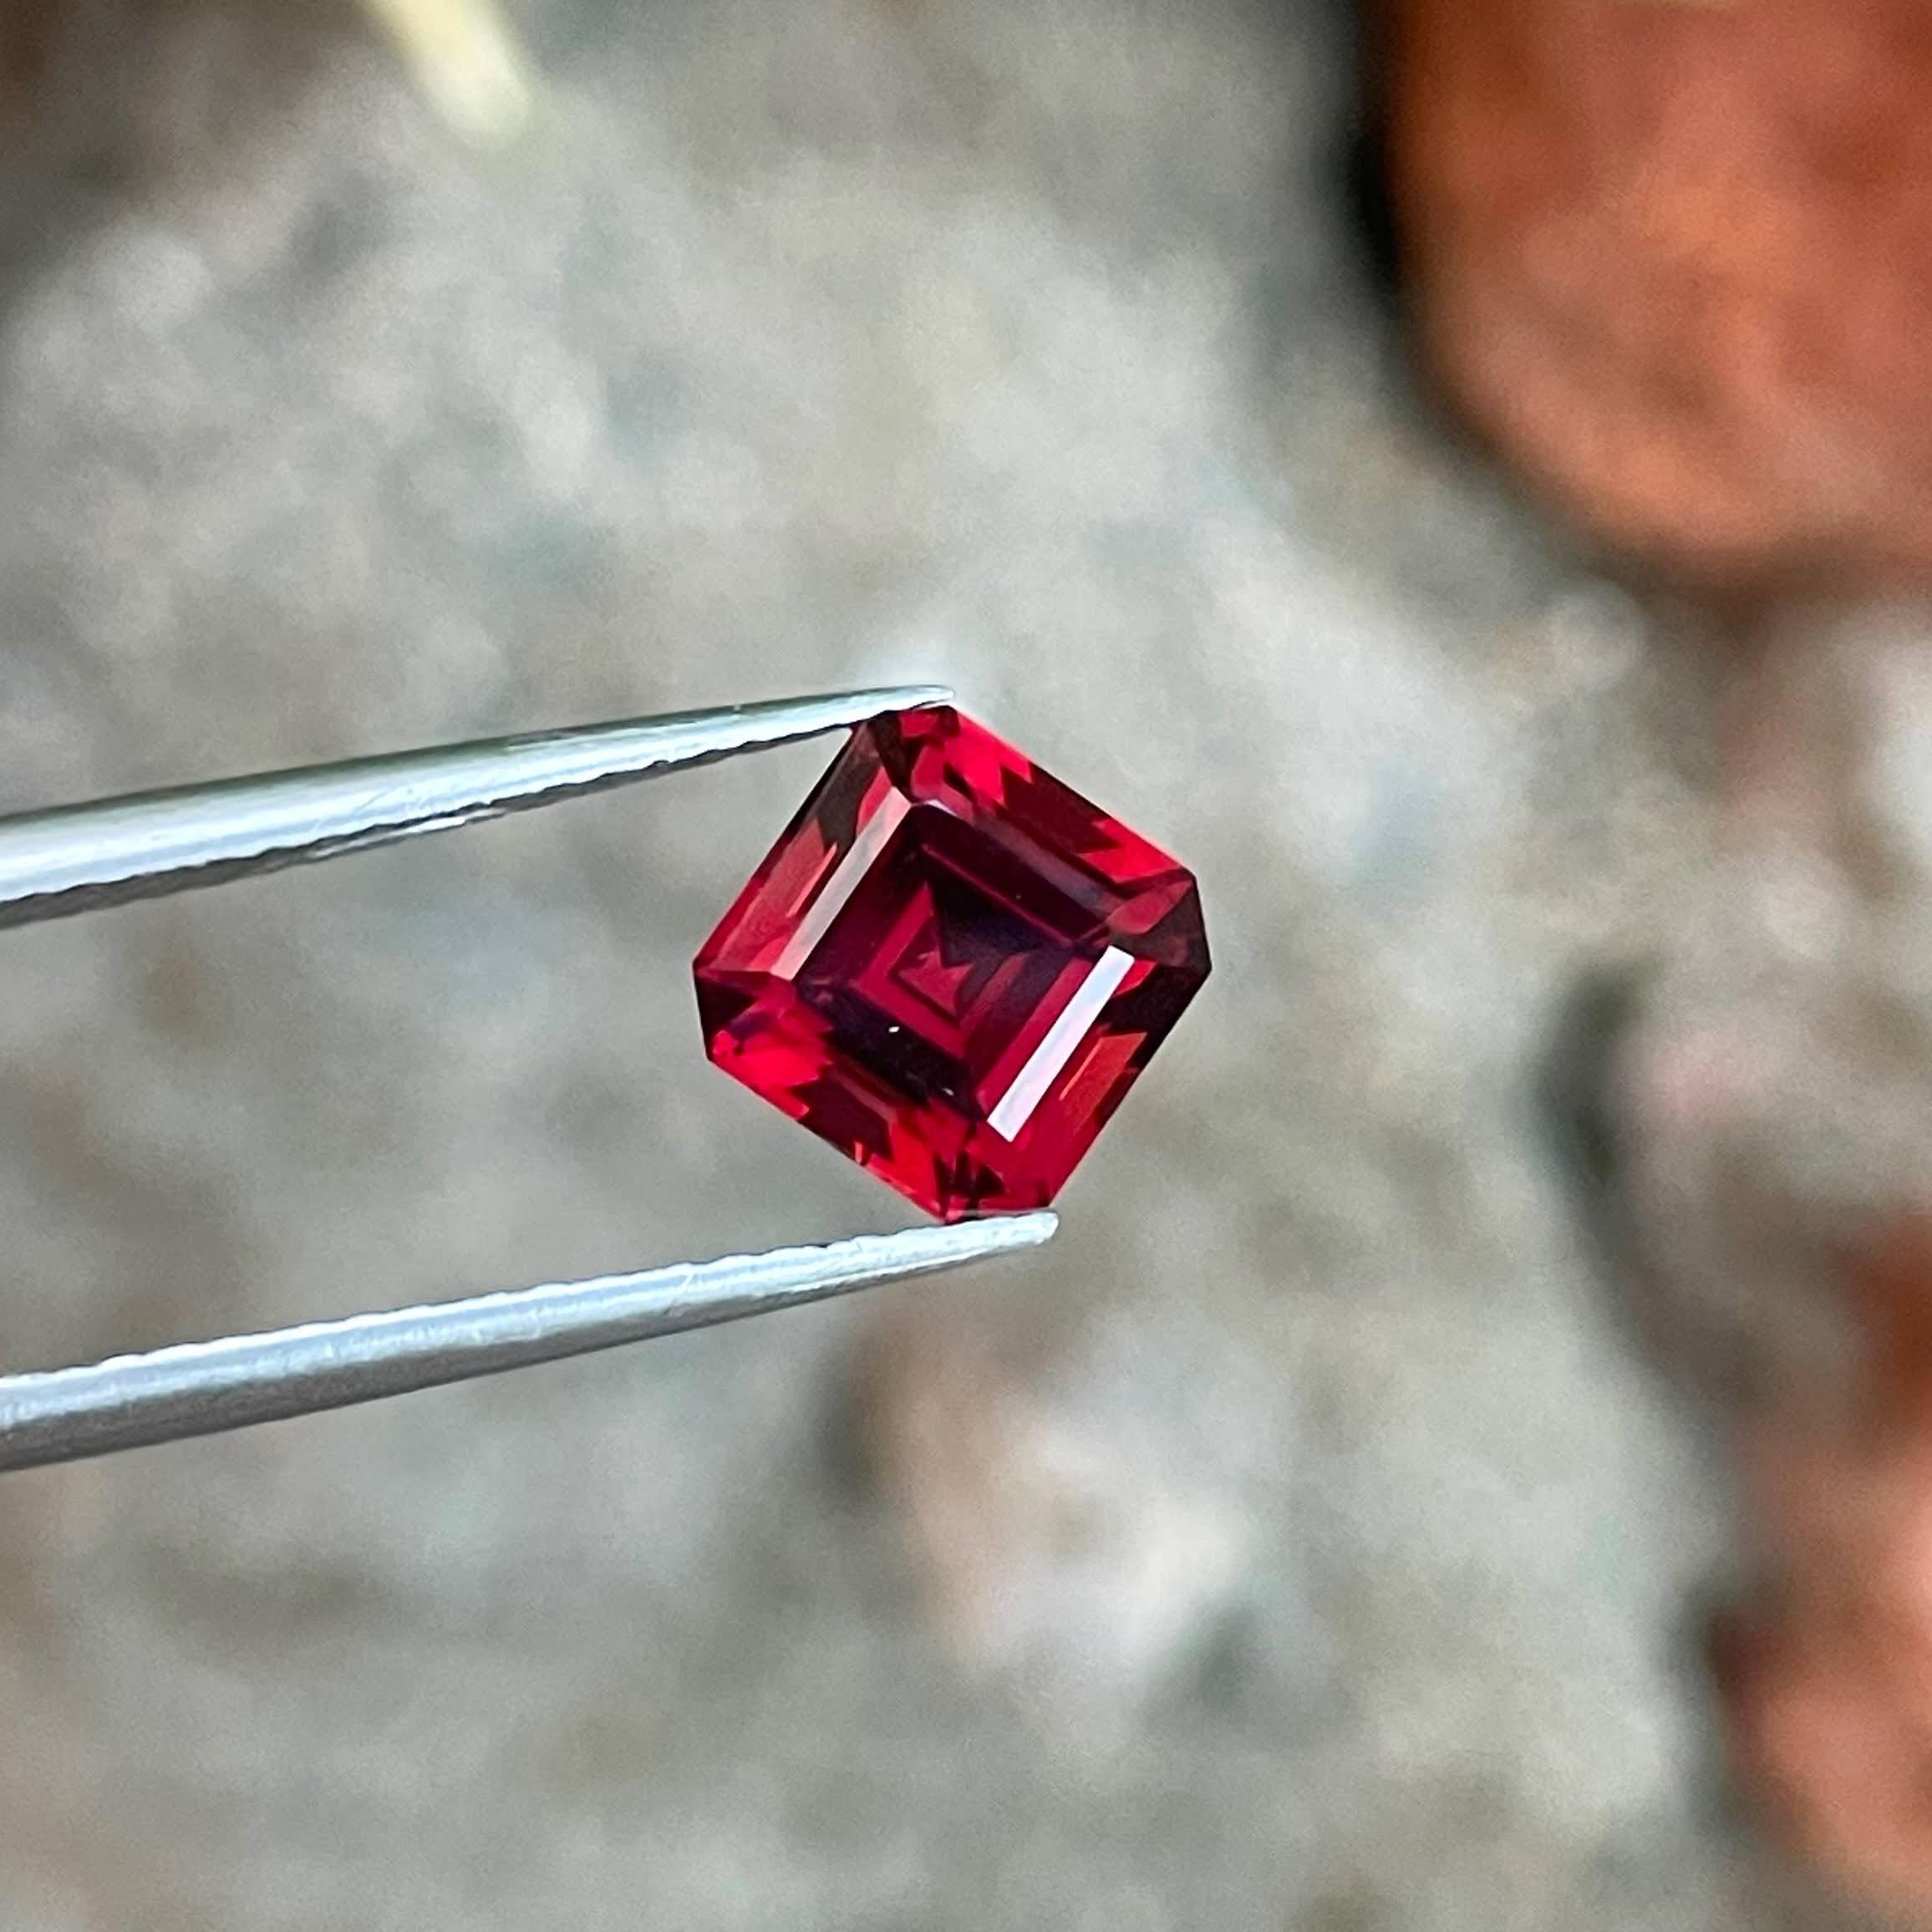 Weight 2.60 carats 
Dimensions 7.1x7.1x5.4 mm
Treatment none 
Origin Madagascar 
Clarity eye clean 
Shape octagon 
Cut emerald 




This striking 2.60 carats Bright Red Garnet Stone, cut into an exquisite emerald shape, is a testament to the natural